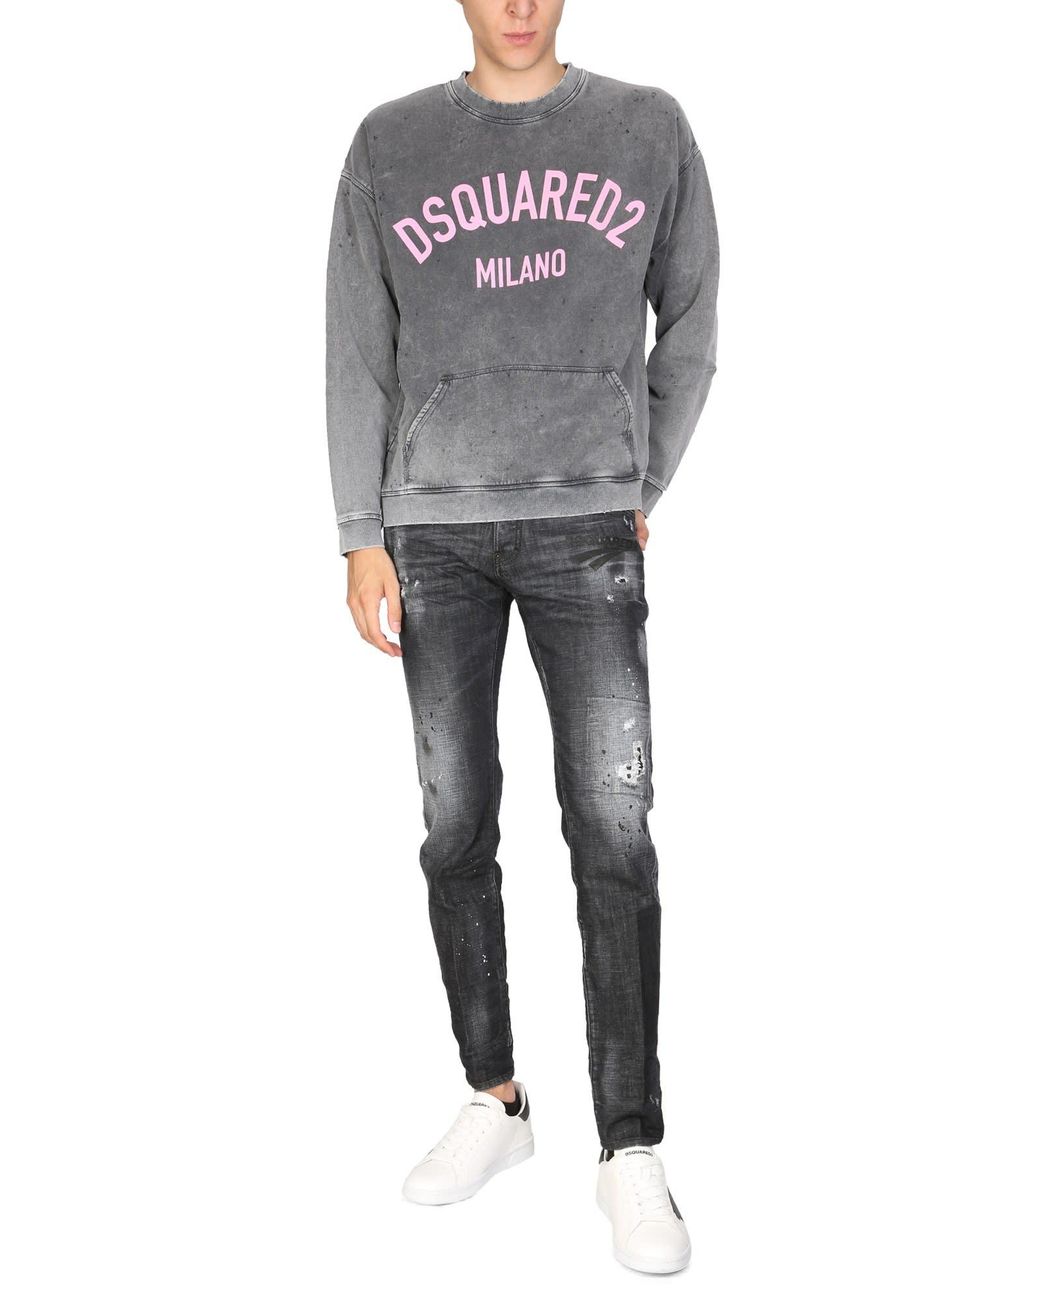 DSquared² Cotton D2 Milano Hoodie Black in Grey Grey gym and workout clothes Mens Activewear gym and workout clothes DSquared² Activewear for Men Save 3% 